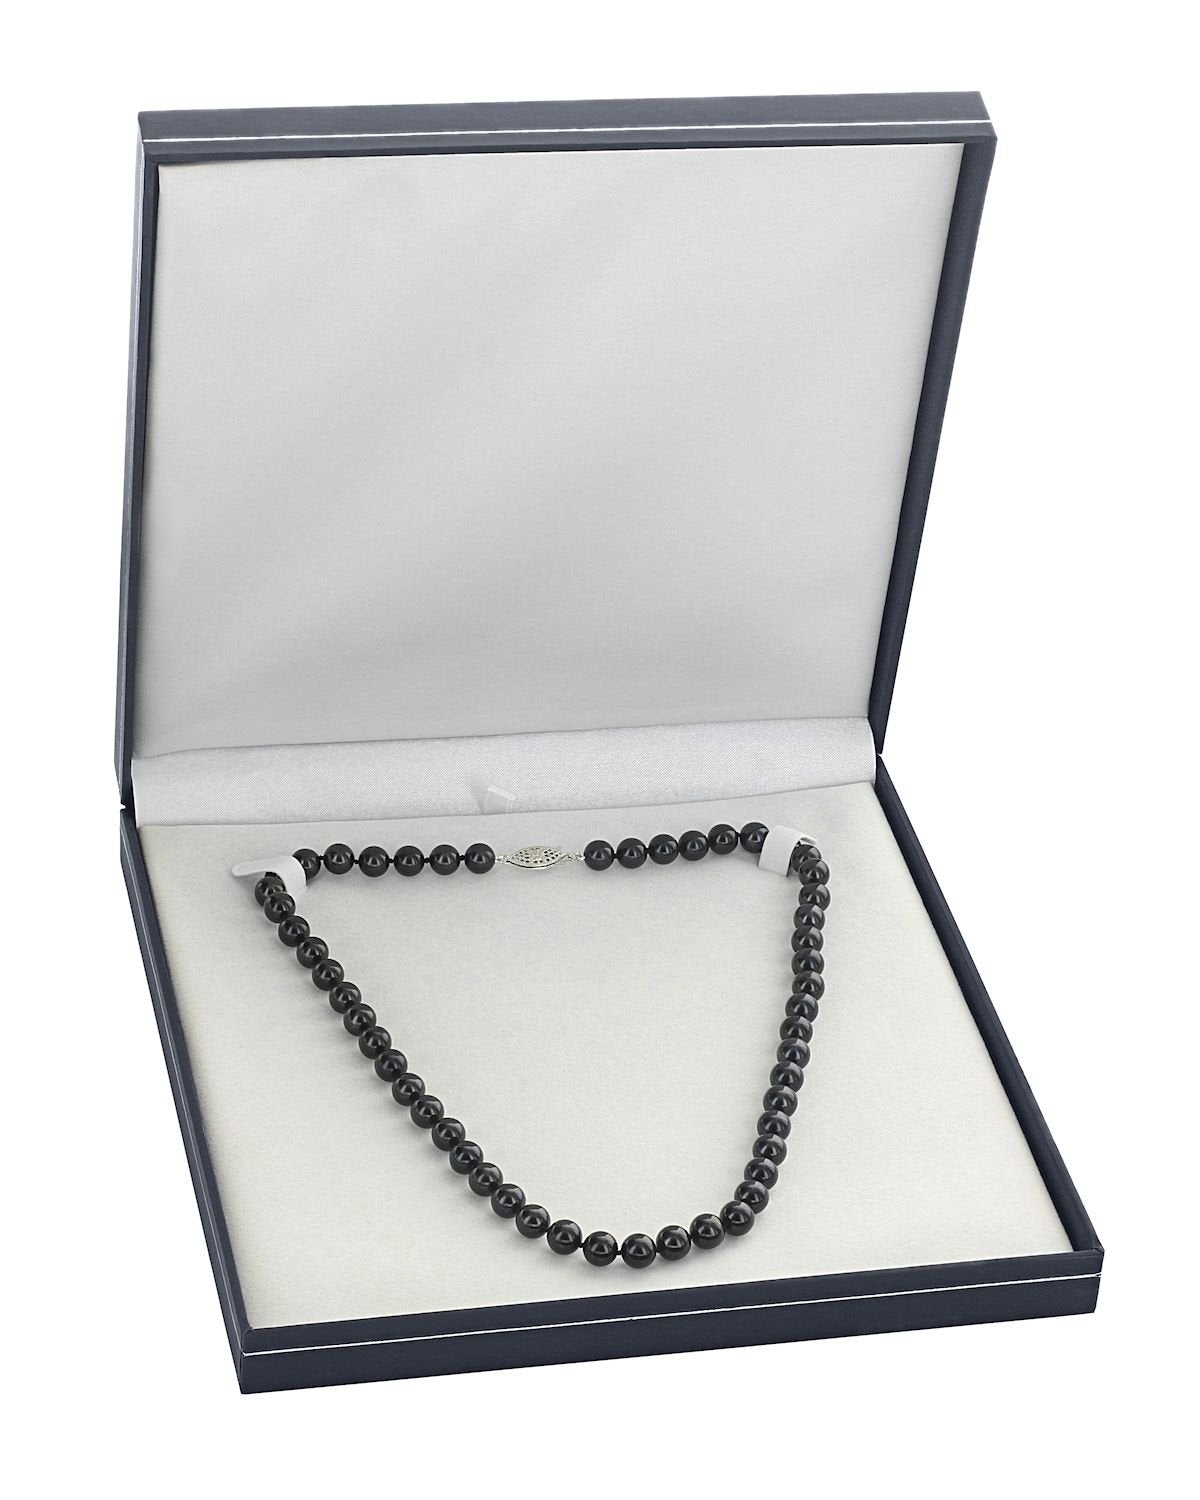 8.0-8.5mm Japanese Akoya Black Pearl Necklace- AA+ Quality - Fourth Image